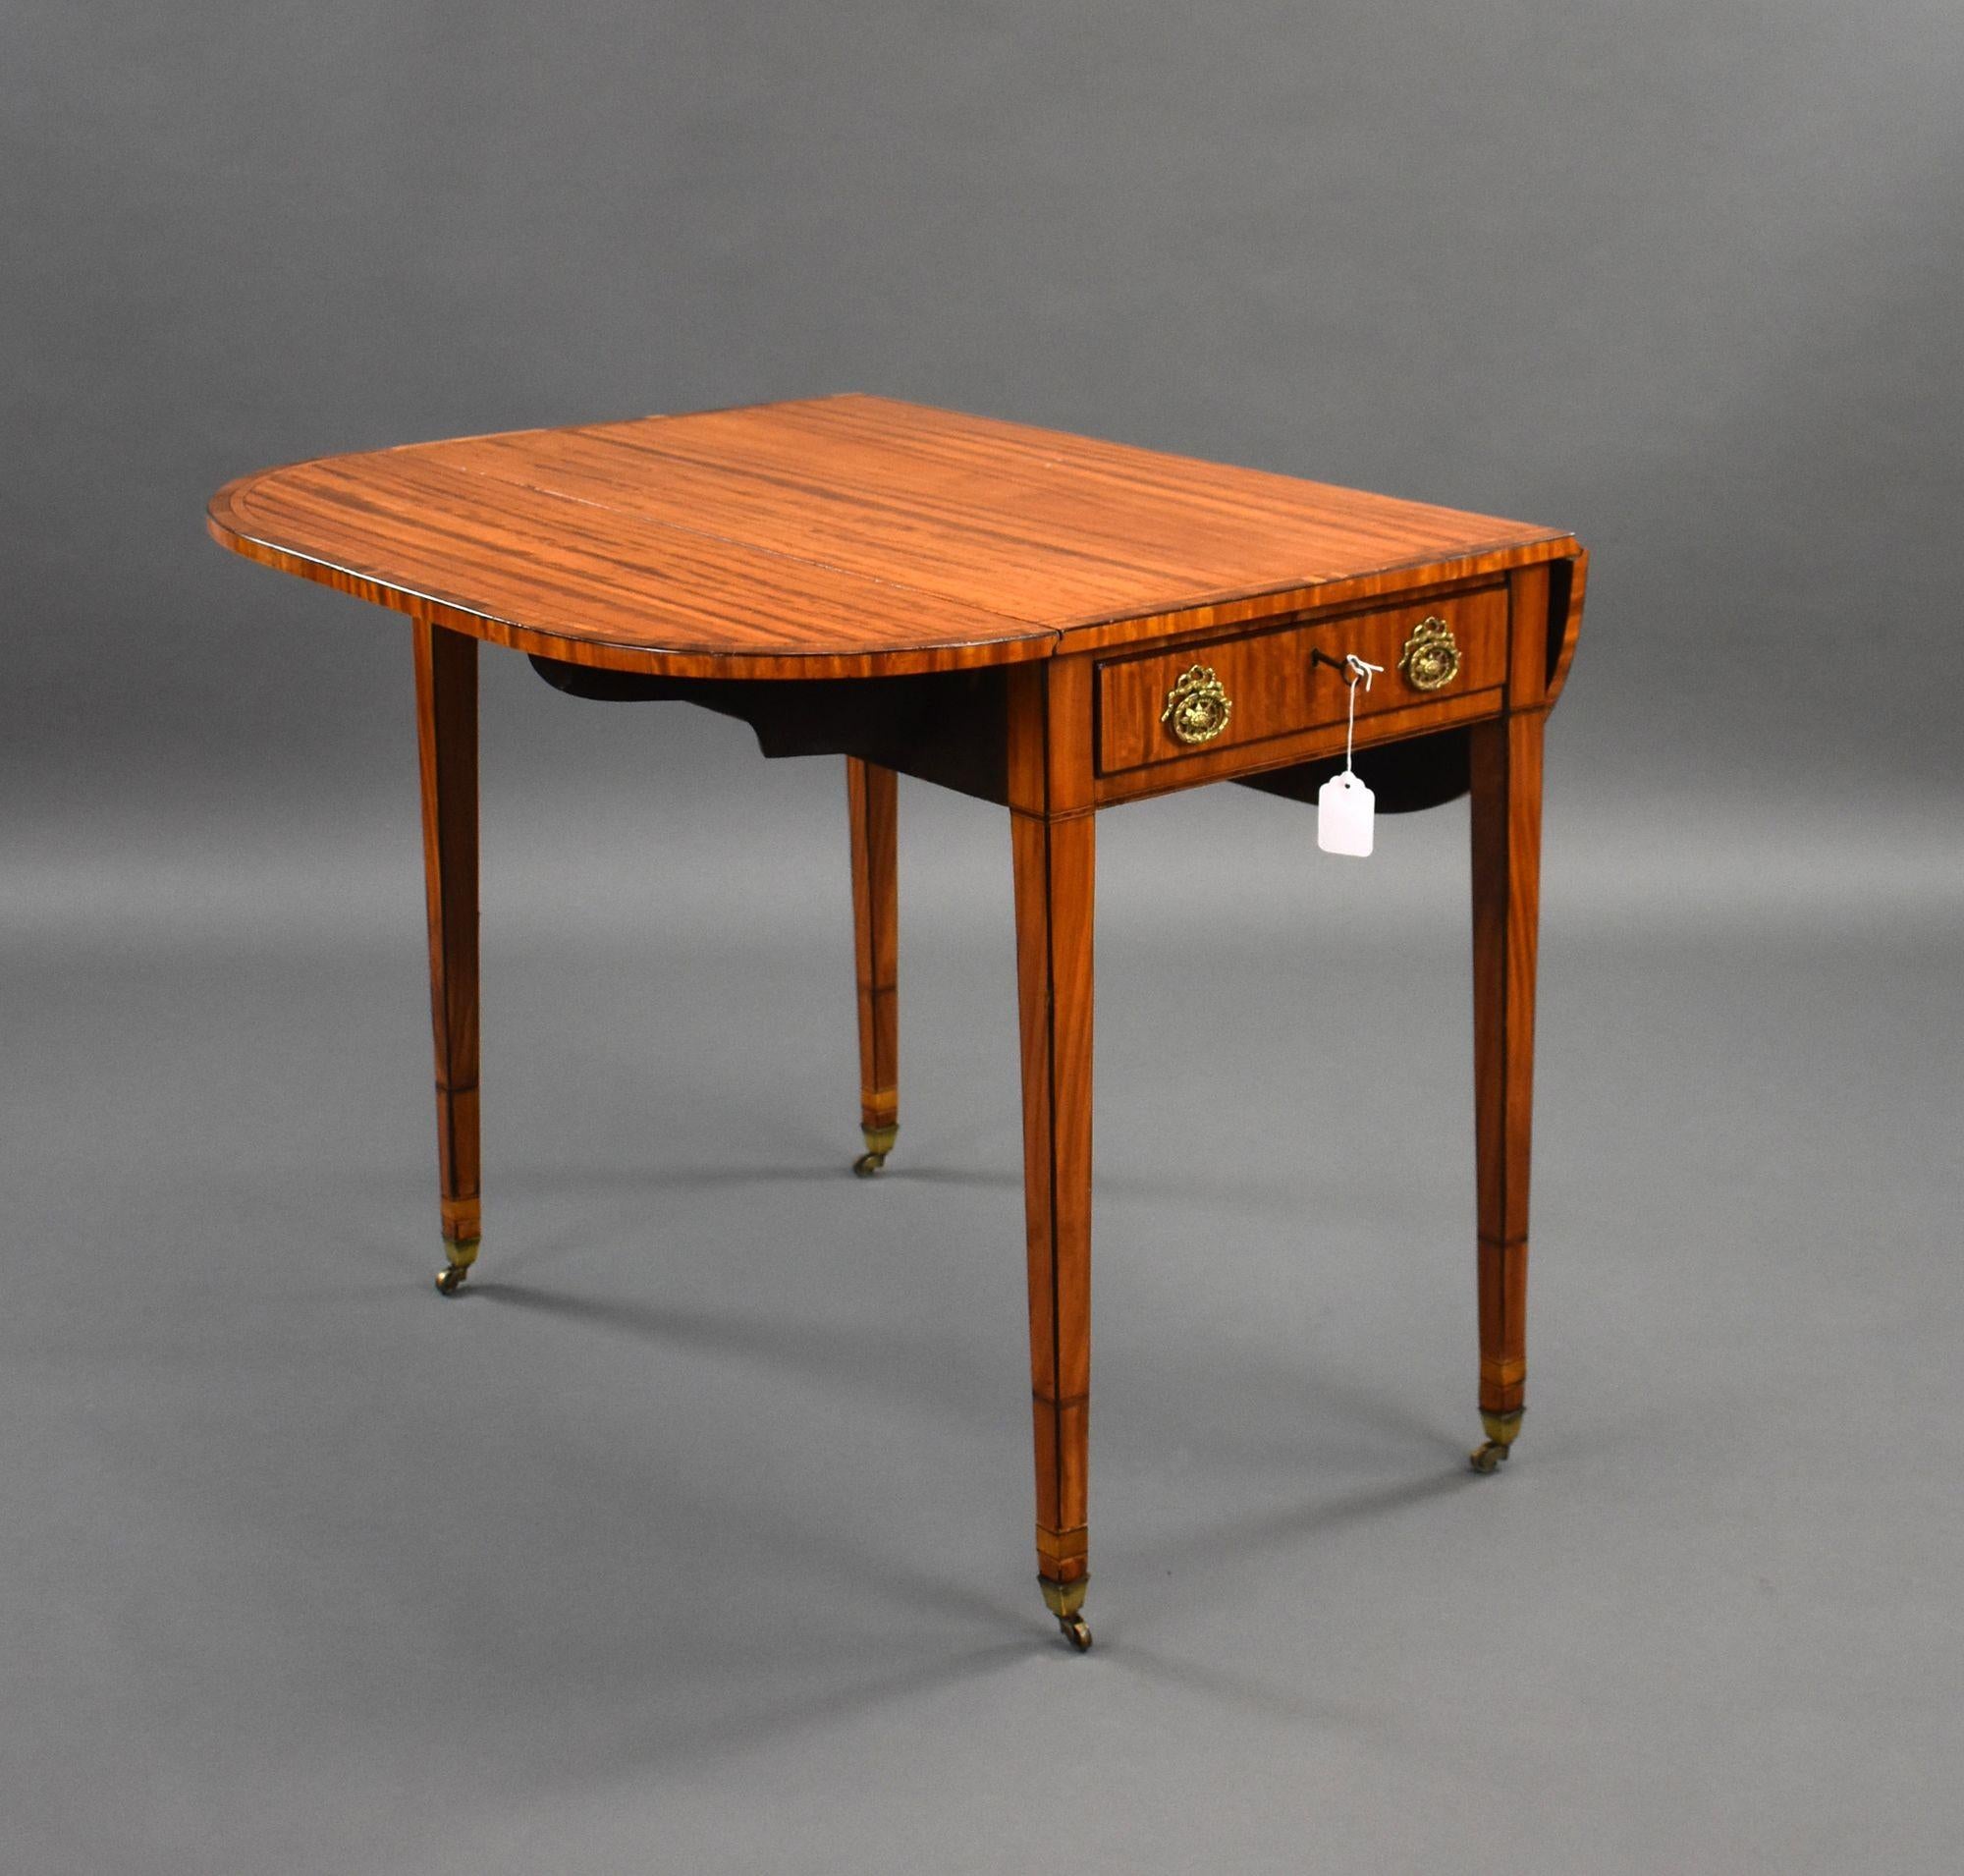 For sale is a good quality George III Satinwood pembroke table, having a well figured top with two drop leaves, the central drawer with brass handles, and a faux drawer on the opposing side, standing on elegant tapered legs terminating on castors,